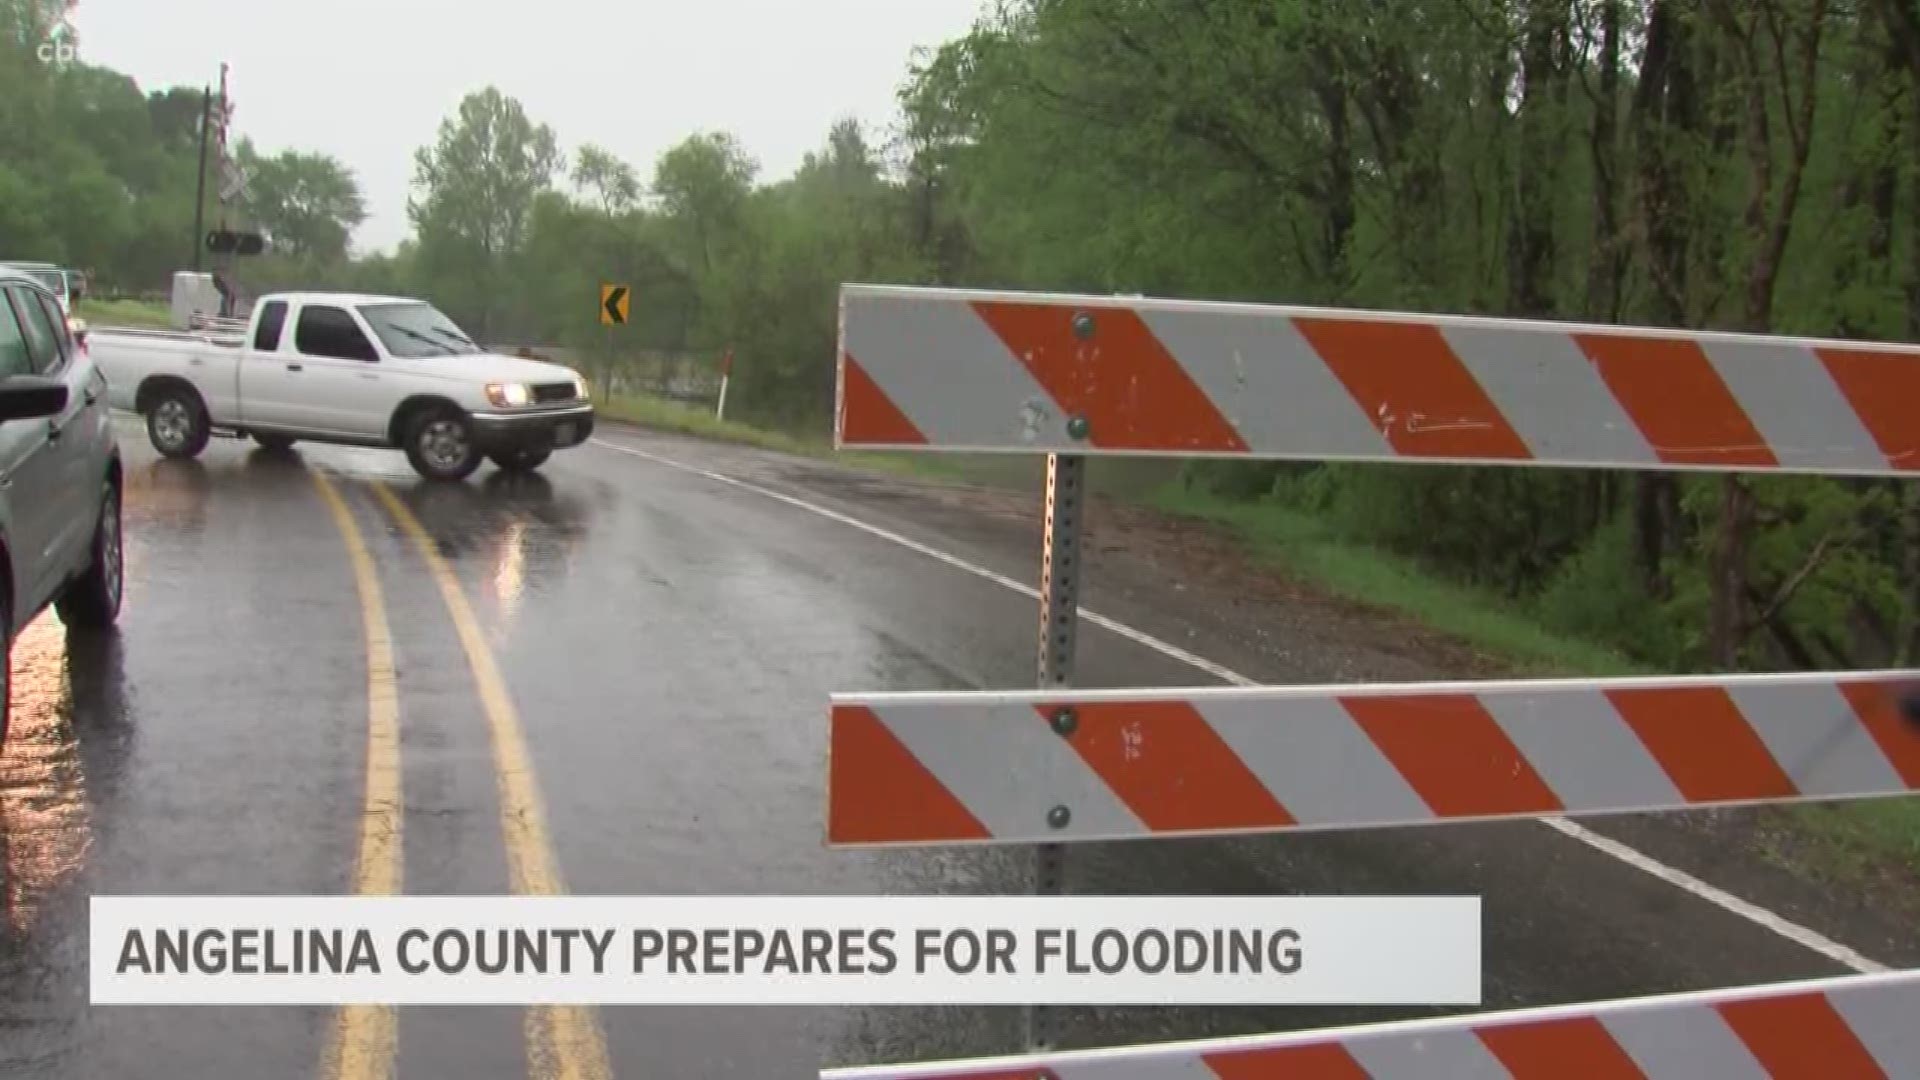 With heavy rain expected in Angelina County, TxDOT crews are preparing for high water on some of the roads.